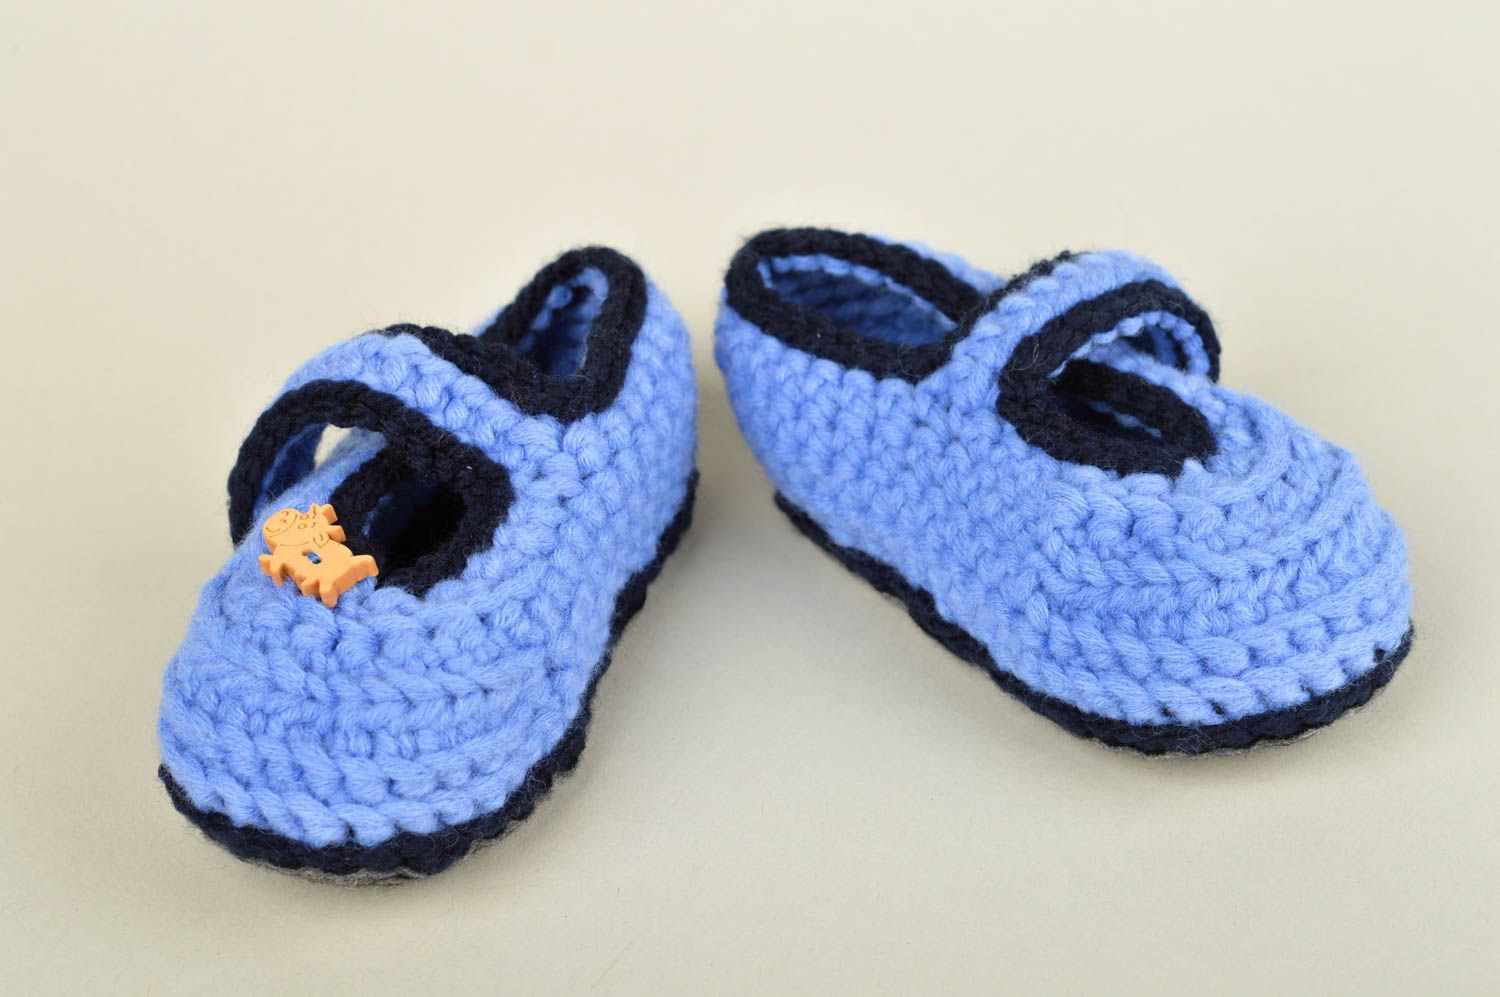 Handmade crocheted baby bootees designer blue baby bootees shoes for boys photo 1